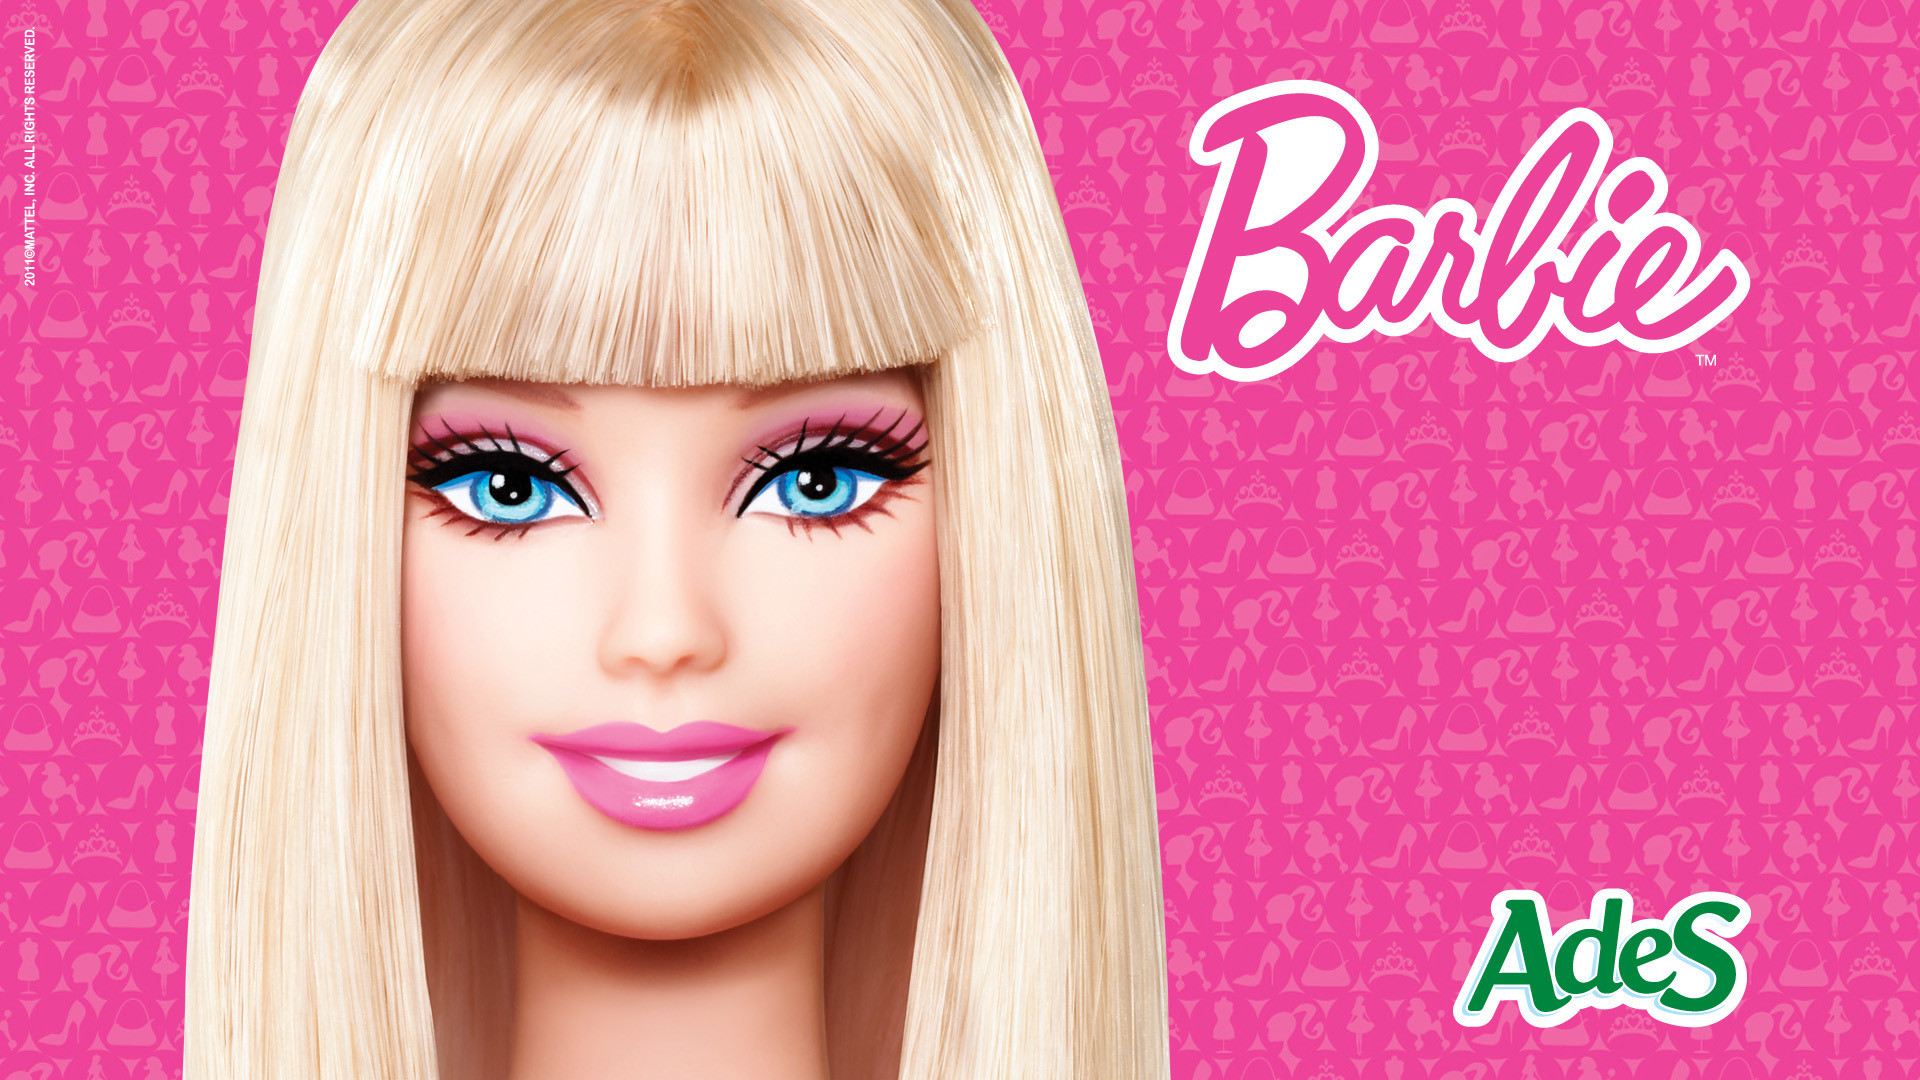 Latest Wallpaper of Barbie on 2018 (50+ pictures)